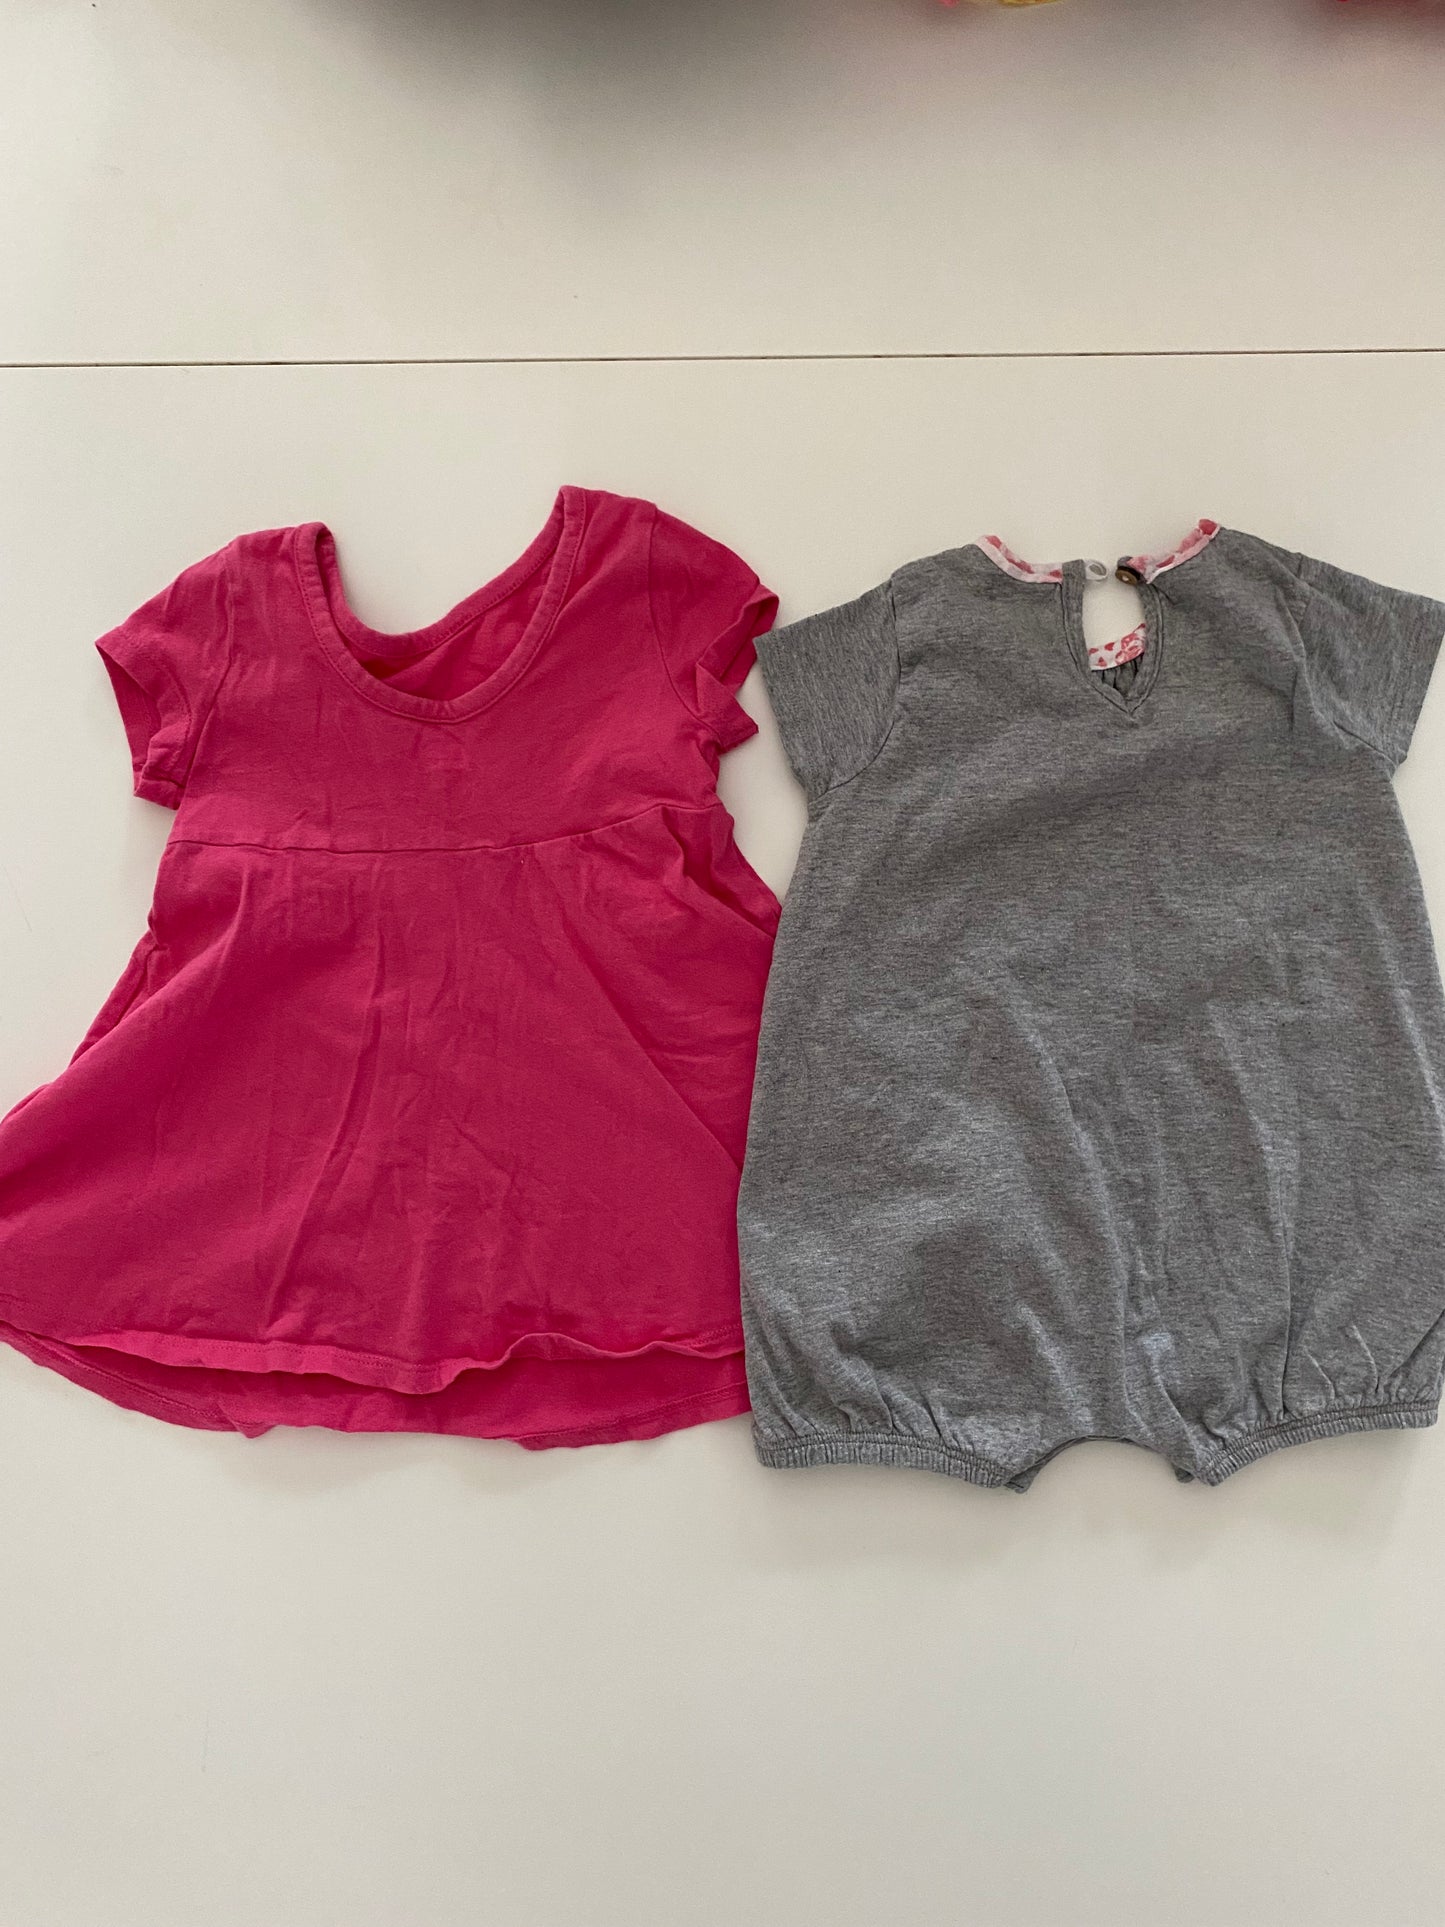 Old Navy Hot Pink Dress and Burt’s Bees Gray Romper Girls 12-18M